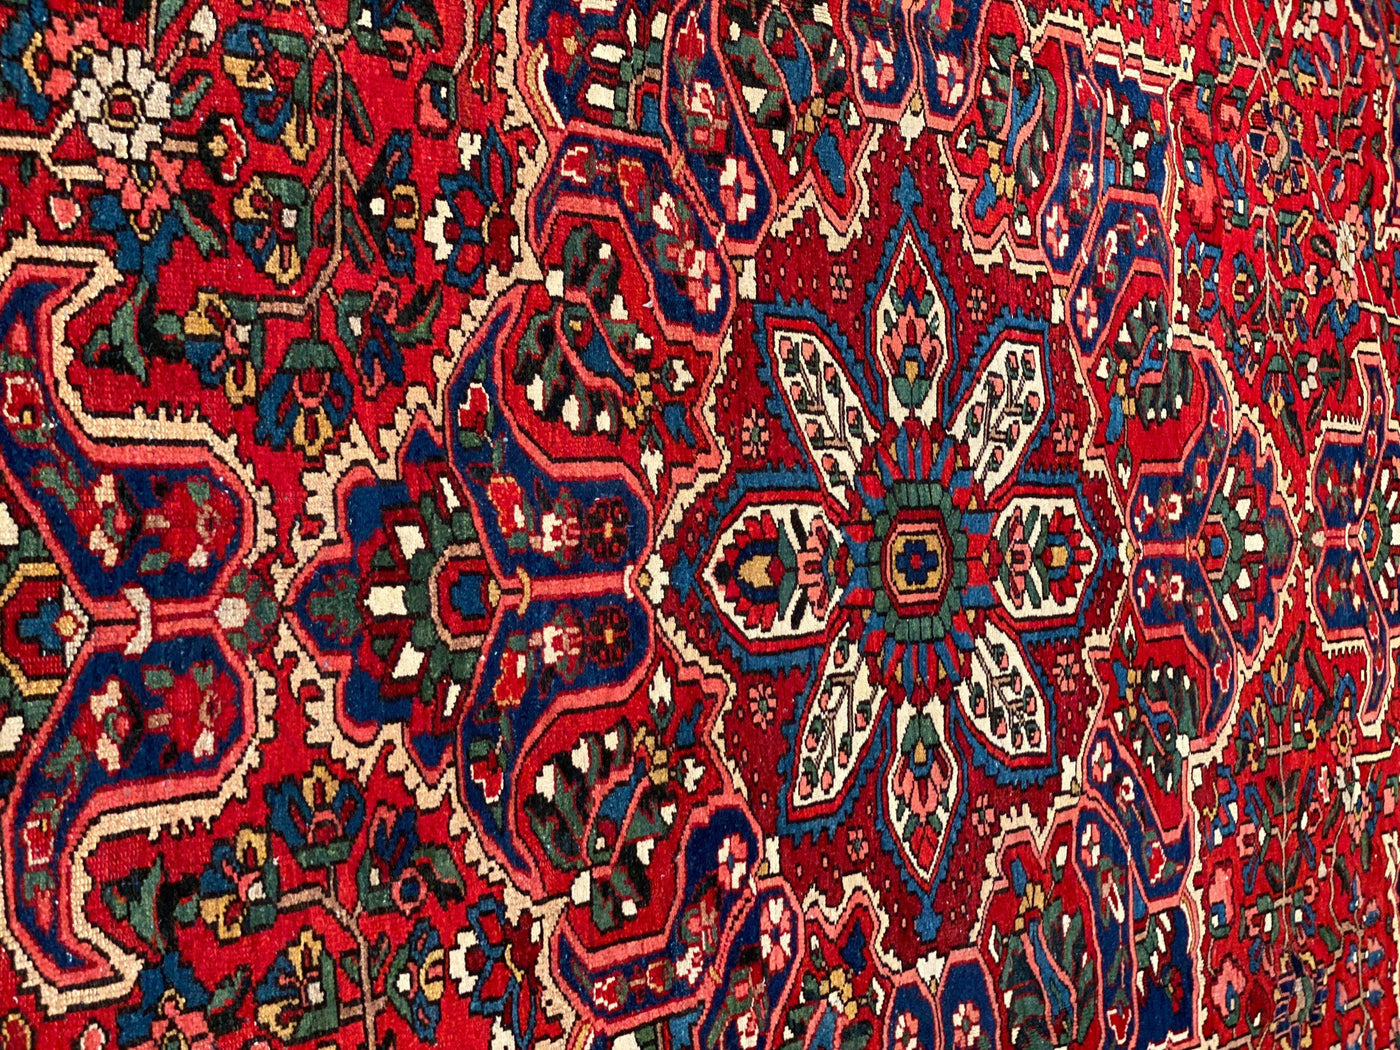 Canvello Persian Bakhtiari Wool Hand Knotted Rugs - 11' X 14'1''